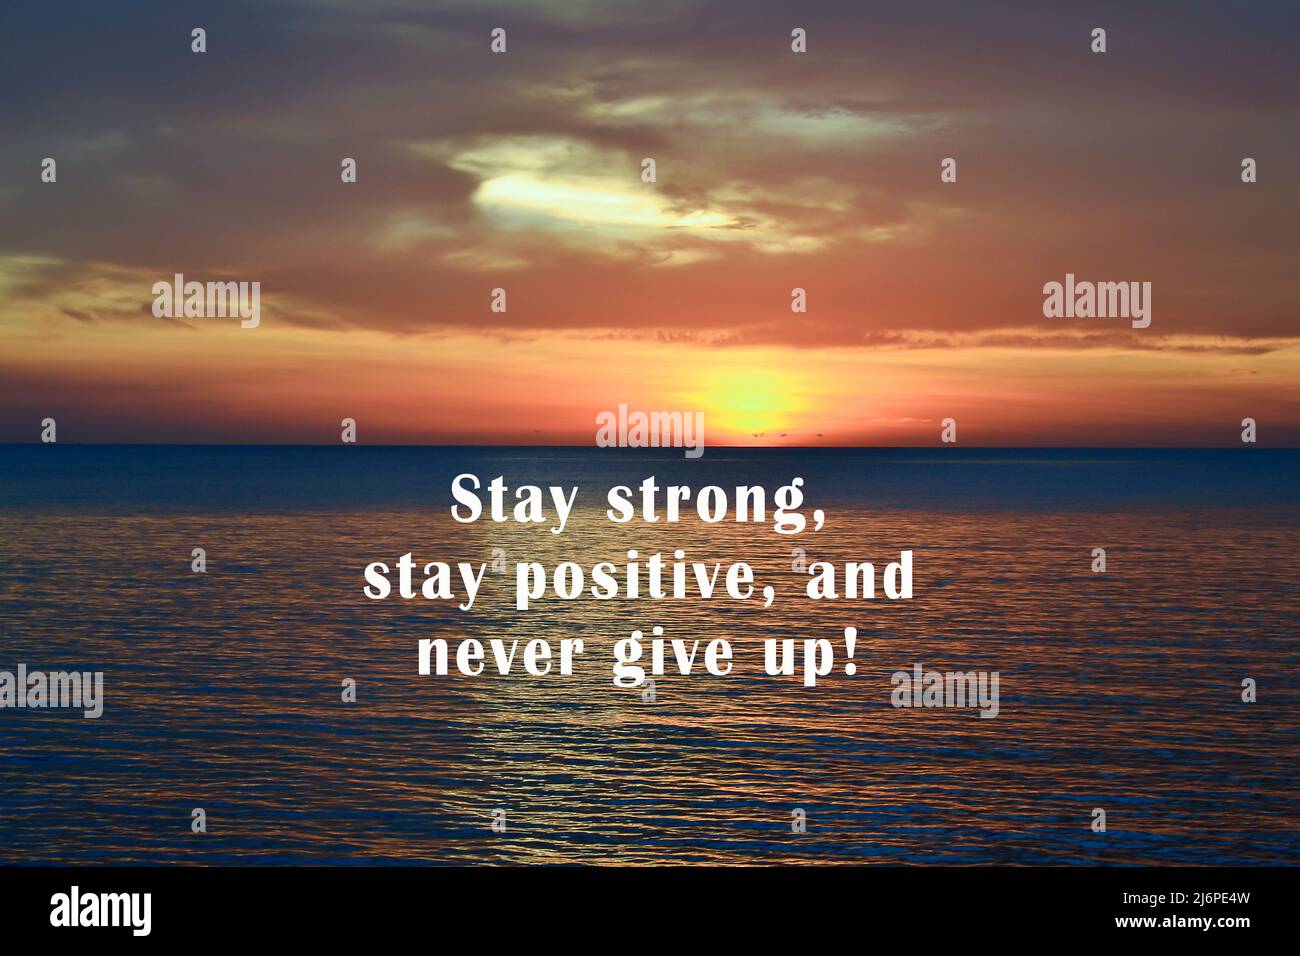 Motivational and inspirational quotes - Stay strong, stay positive ...